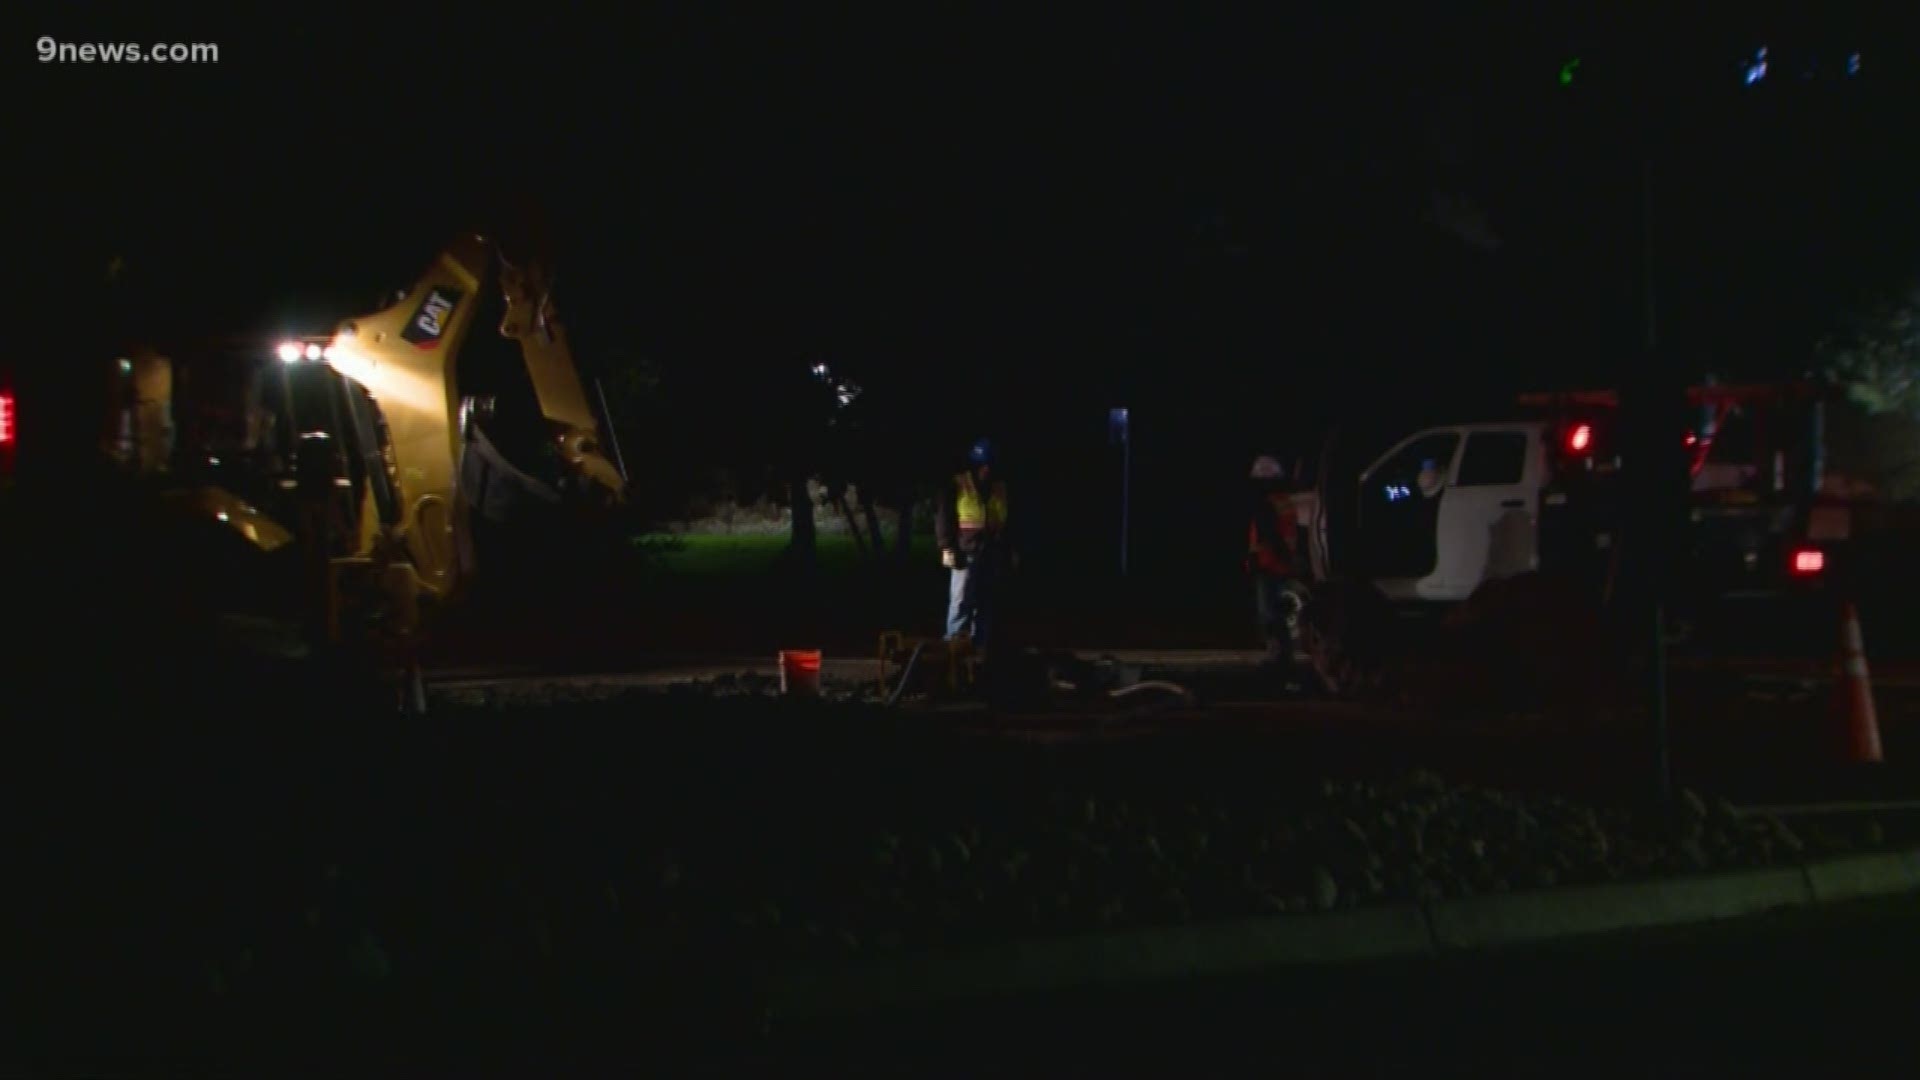 Repairs on the broken water main could last all day, according to Willows Water District.